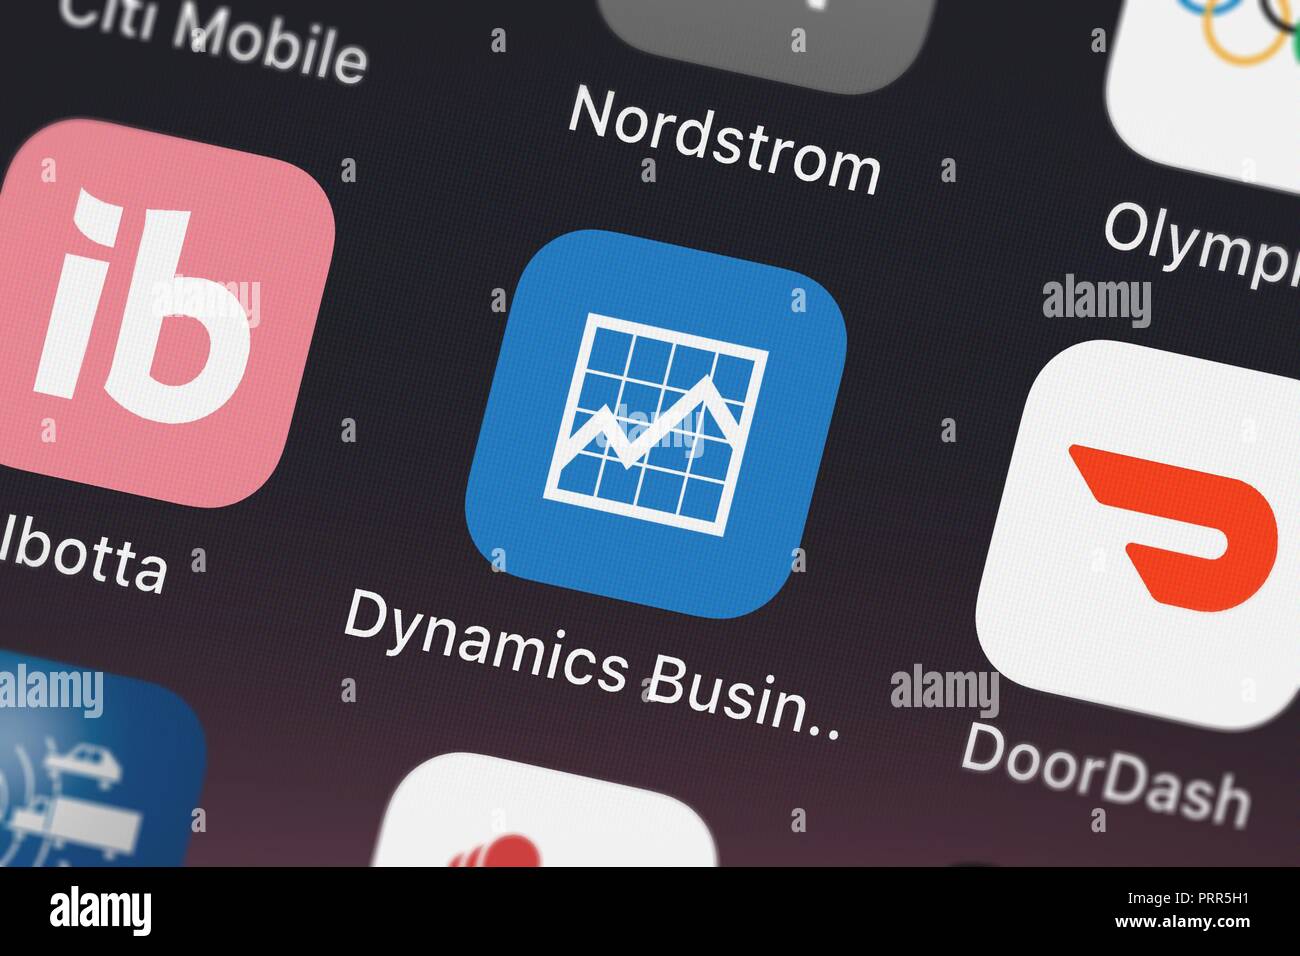 London, United Kingdom - October 03, 2018: Close-up of the Microsoft Dynamics Business Analyzer icon from Microsoft Corporation on an iPhone. Stock Photo